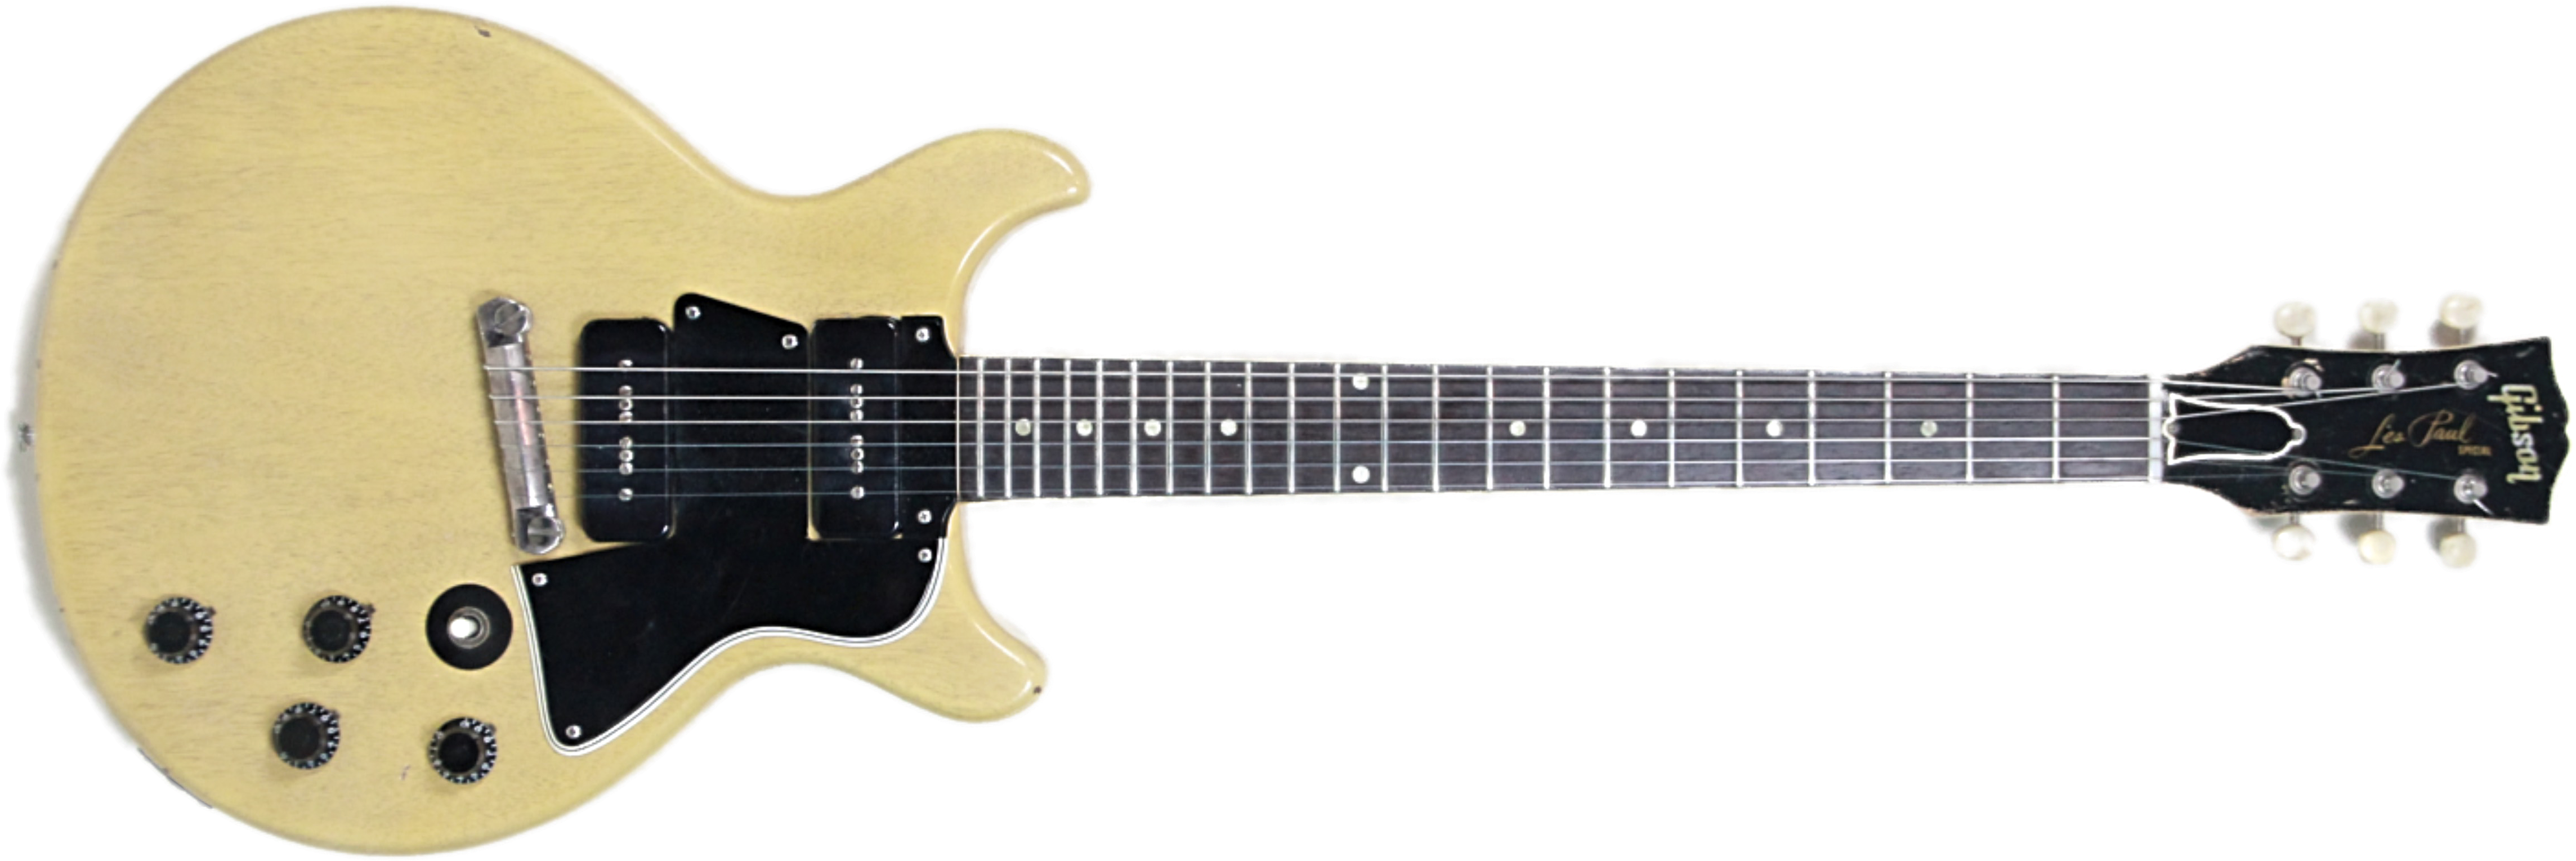 Gibson Les Paul Special Tv Yellow - 2012 Telecaster American Standard (4888x1798), Png Download